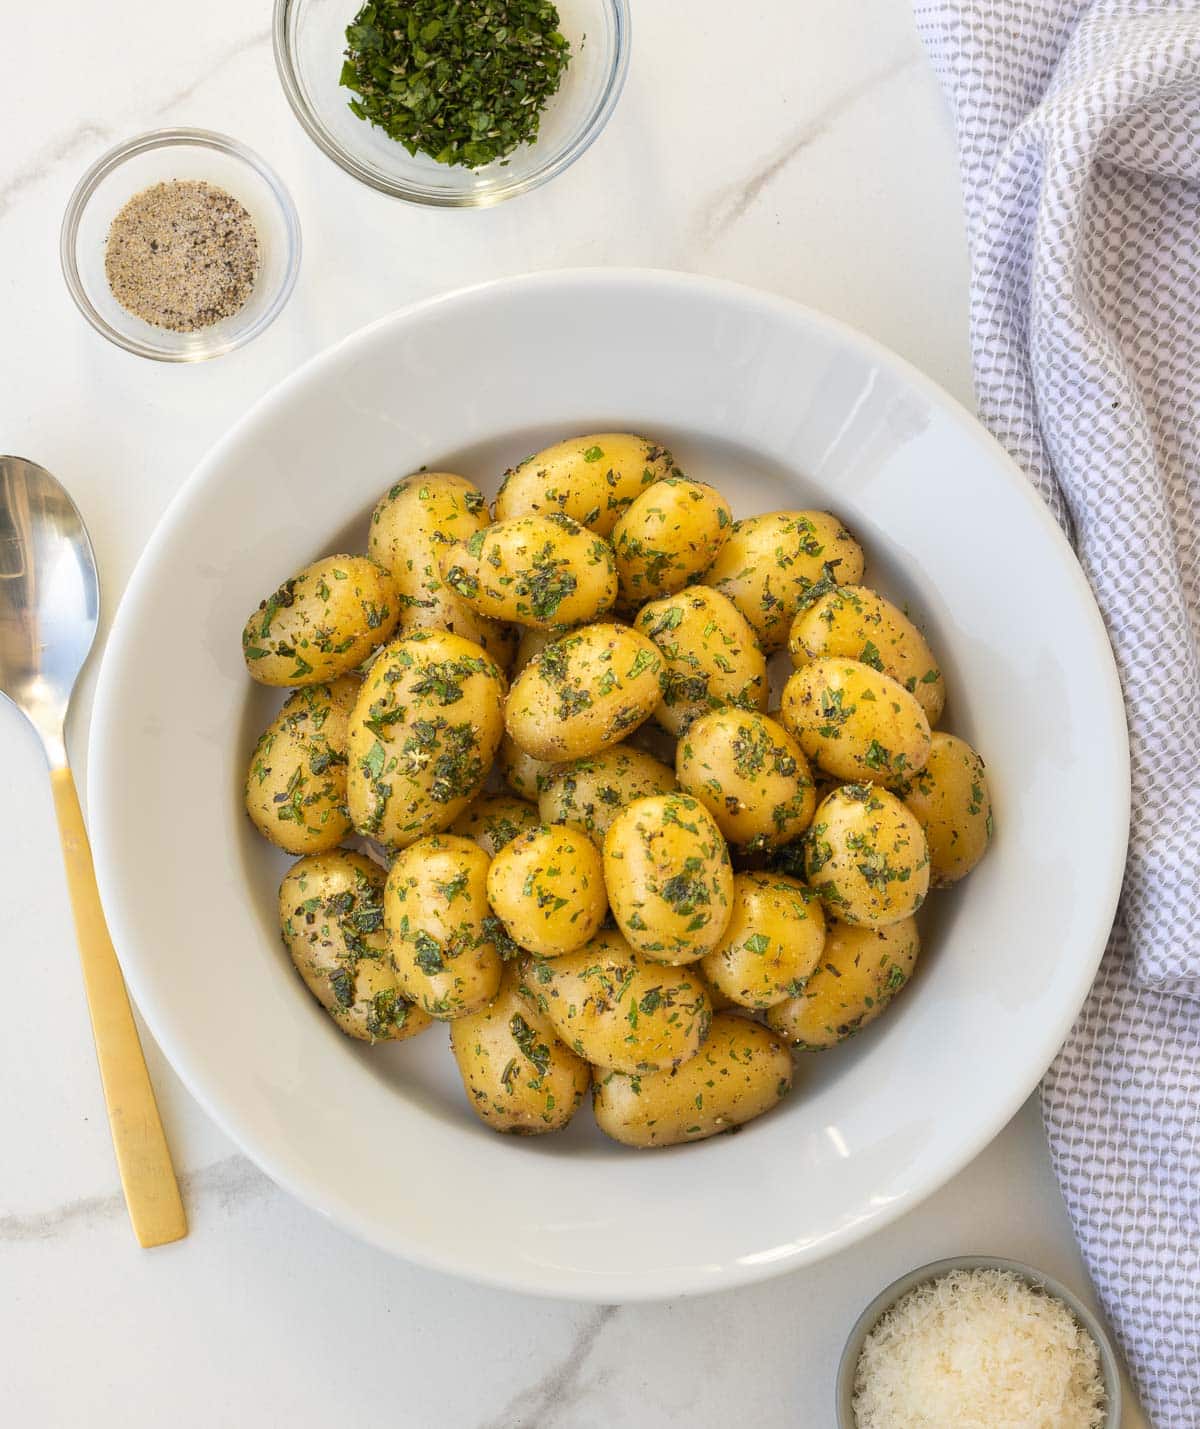 Herbed baby potatoes in a white bowl at the table for serving.